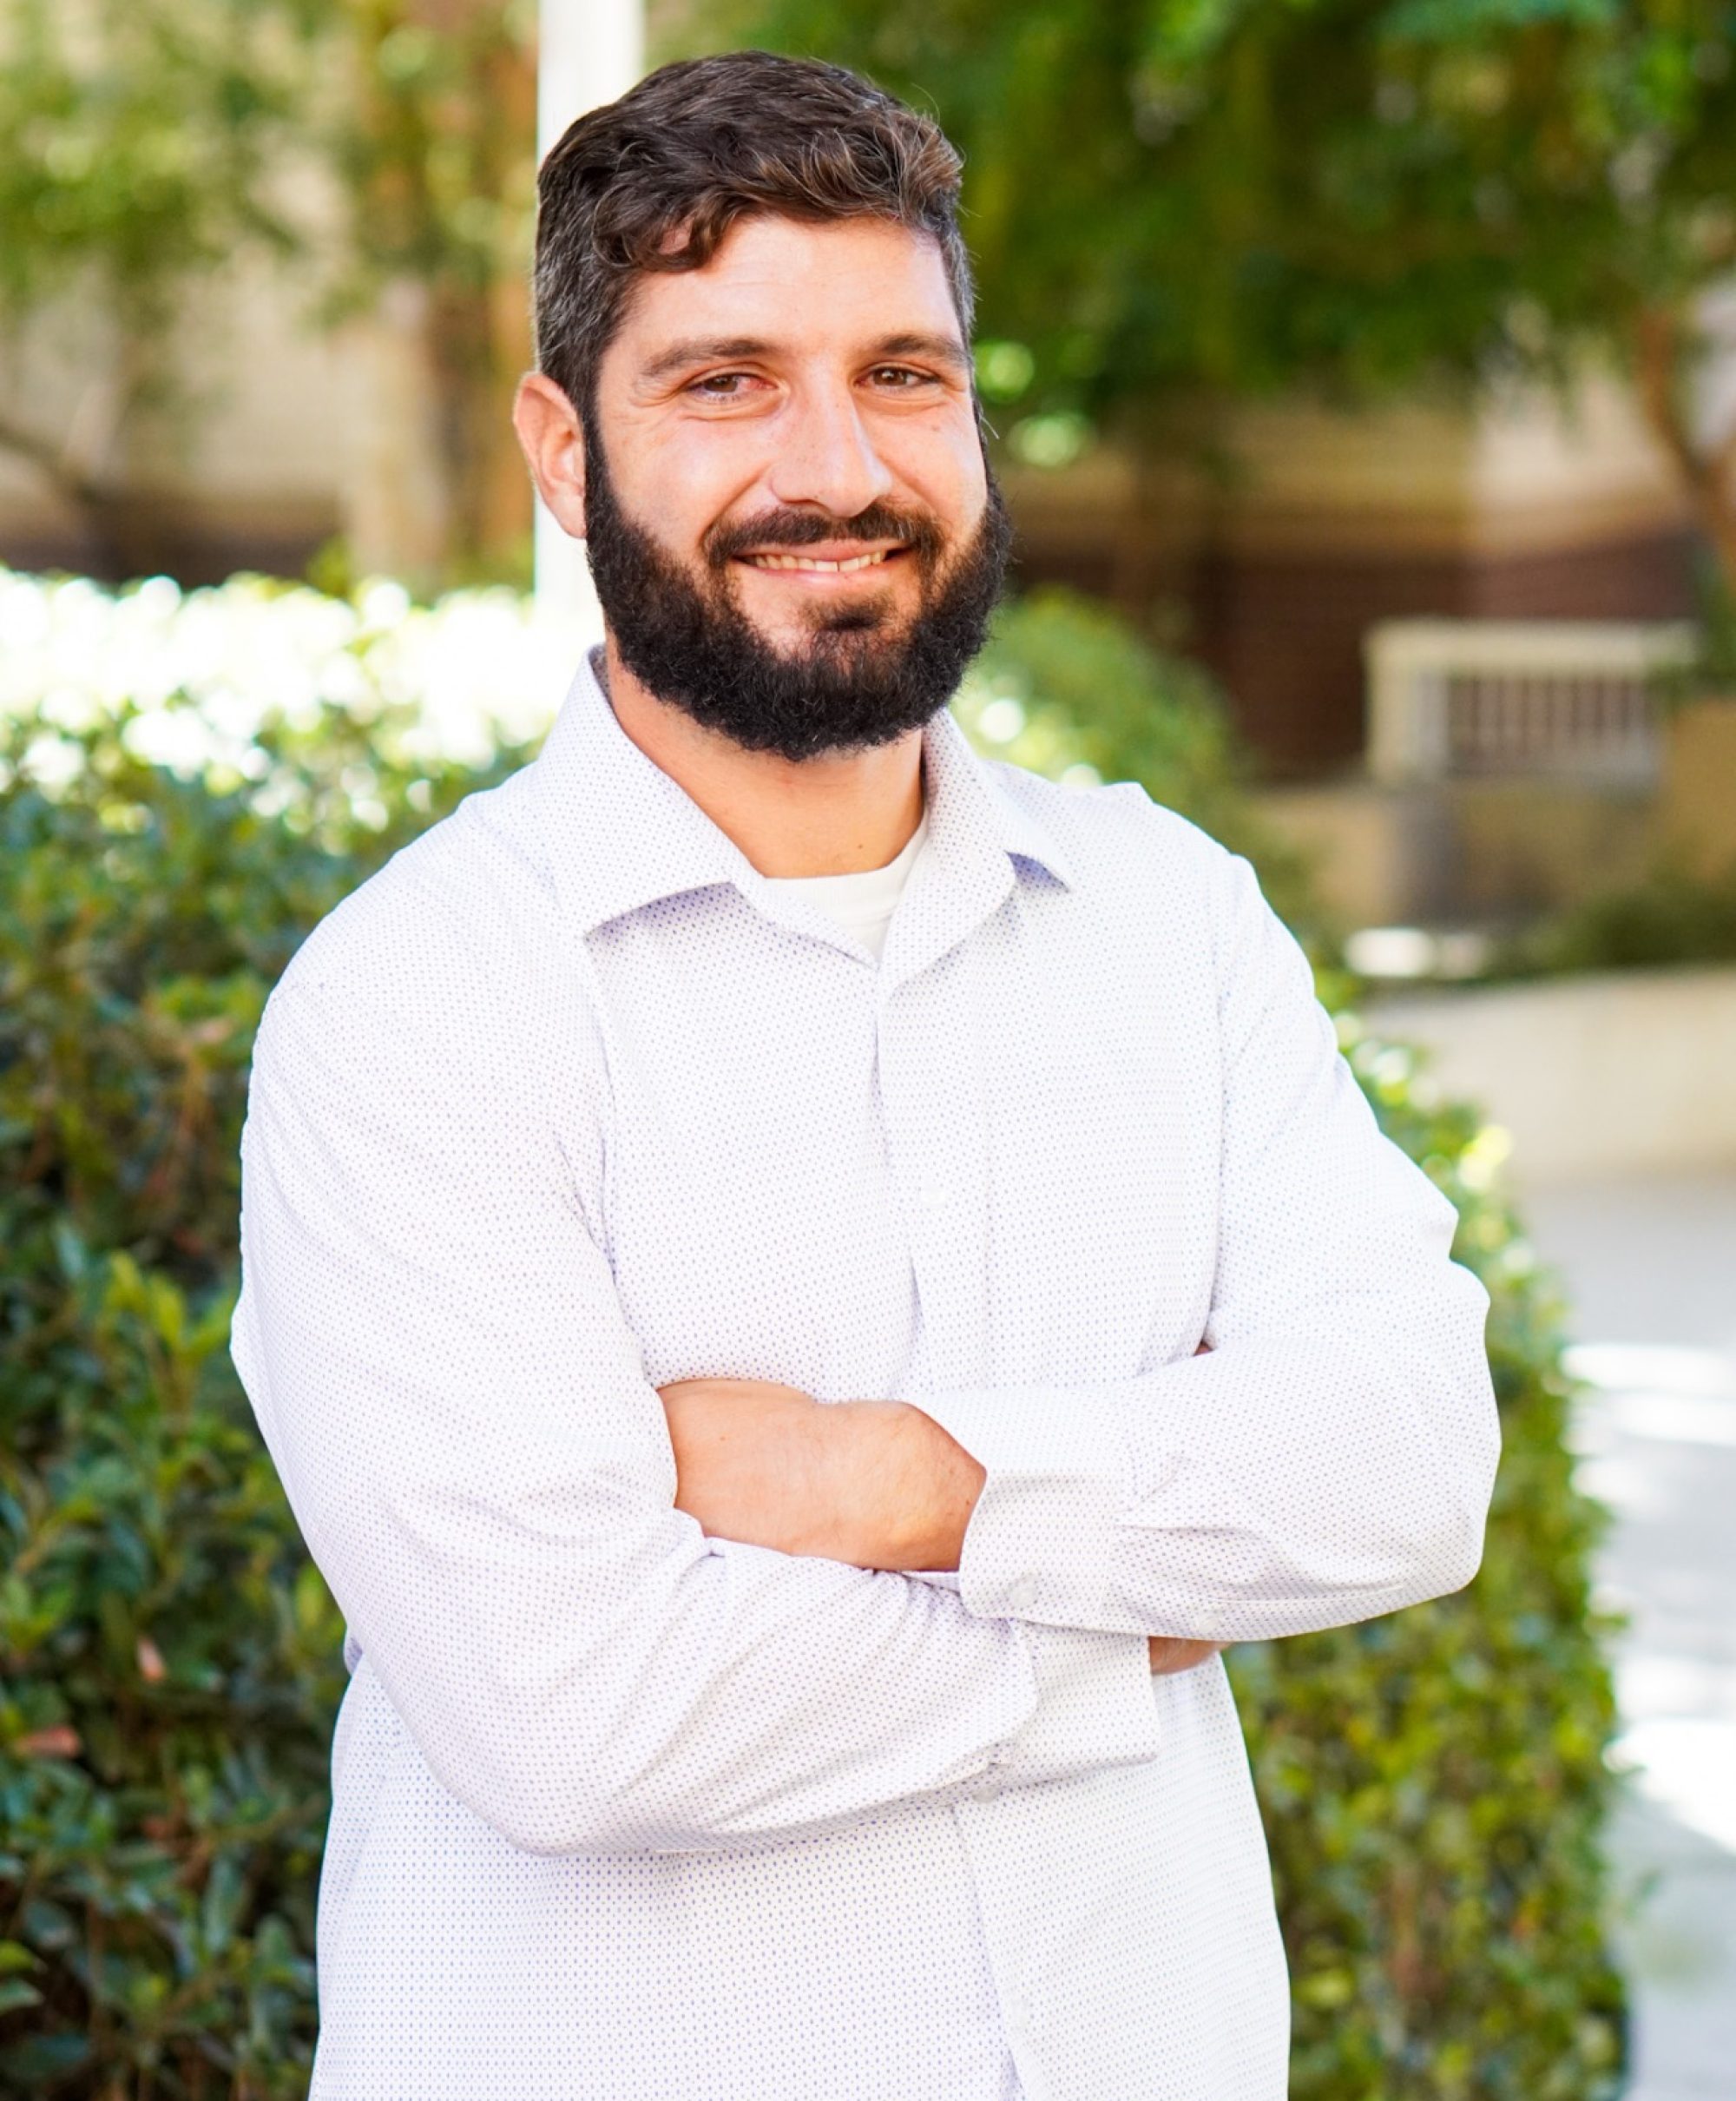 Anthony M. Triola, Doctoral Candidate